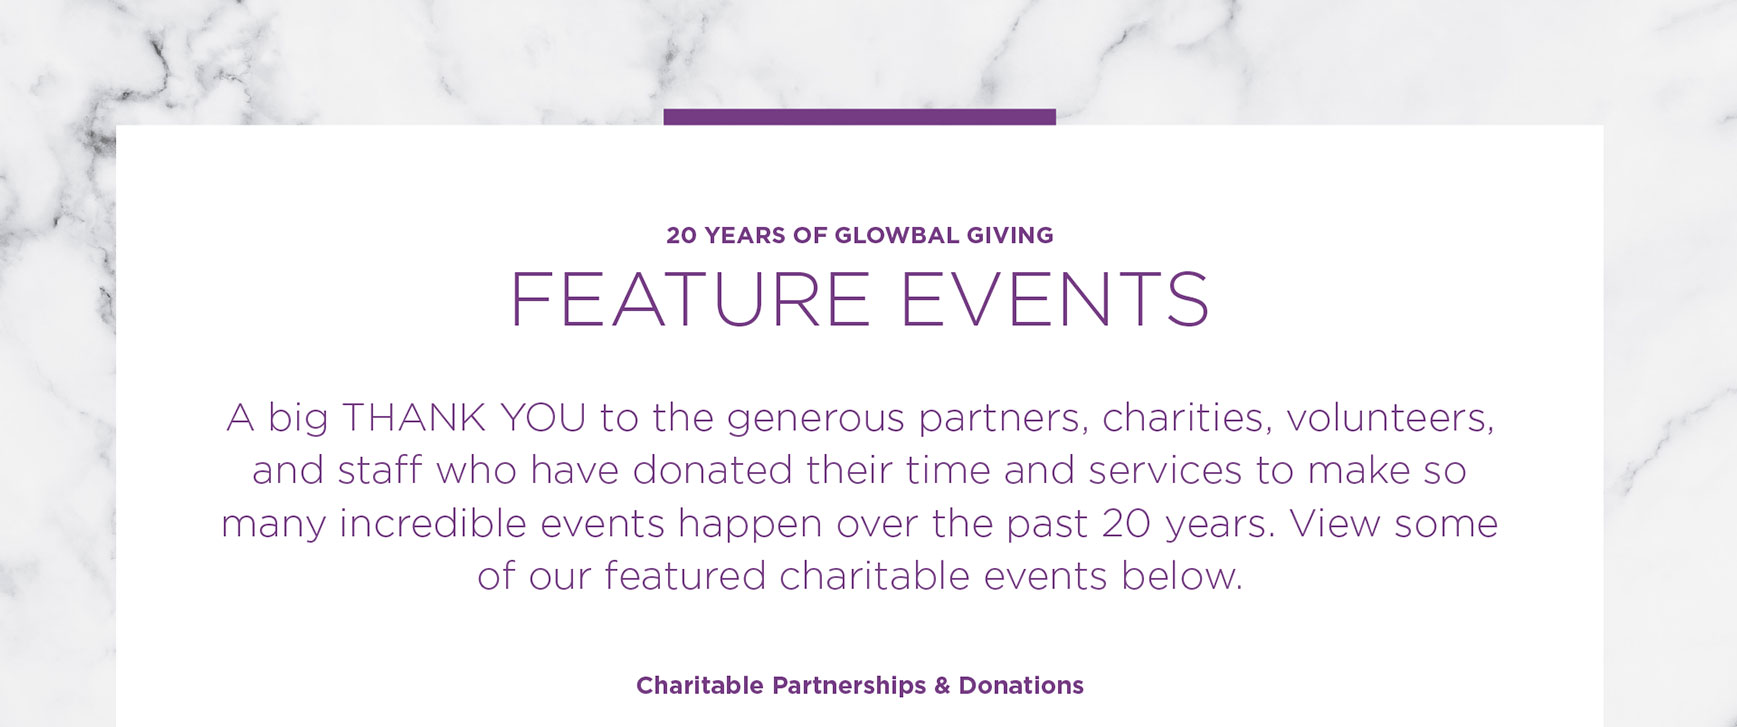 A big THANK YOU to the generous partners, charities, volunteers, and staff who have donated their time and services to make so many incredible events happen over the past 20 years. View some of our featured charitable events below.